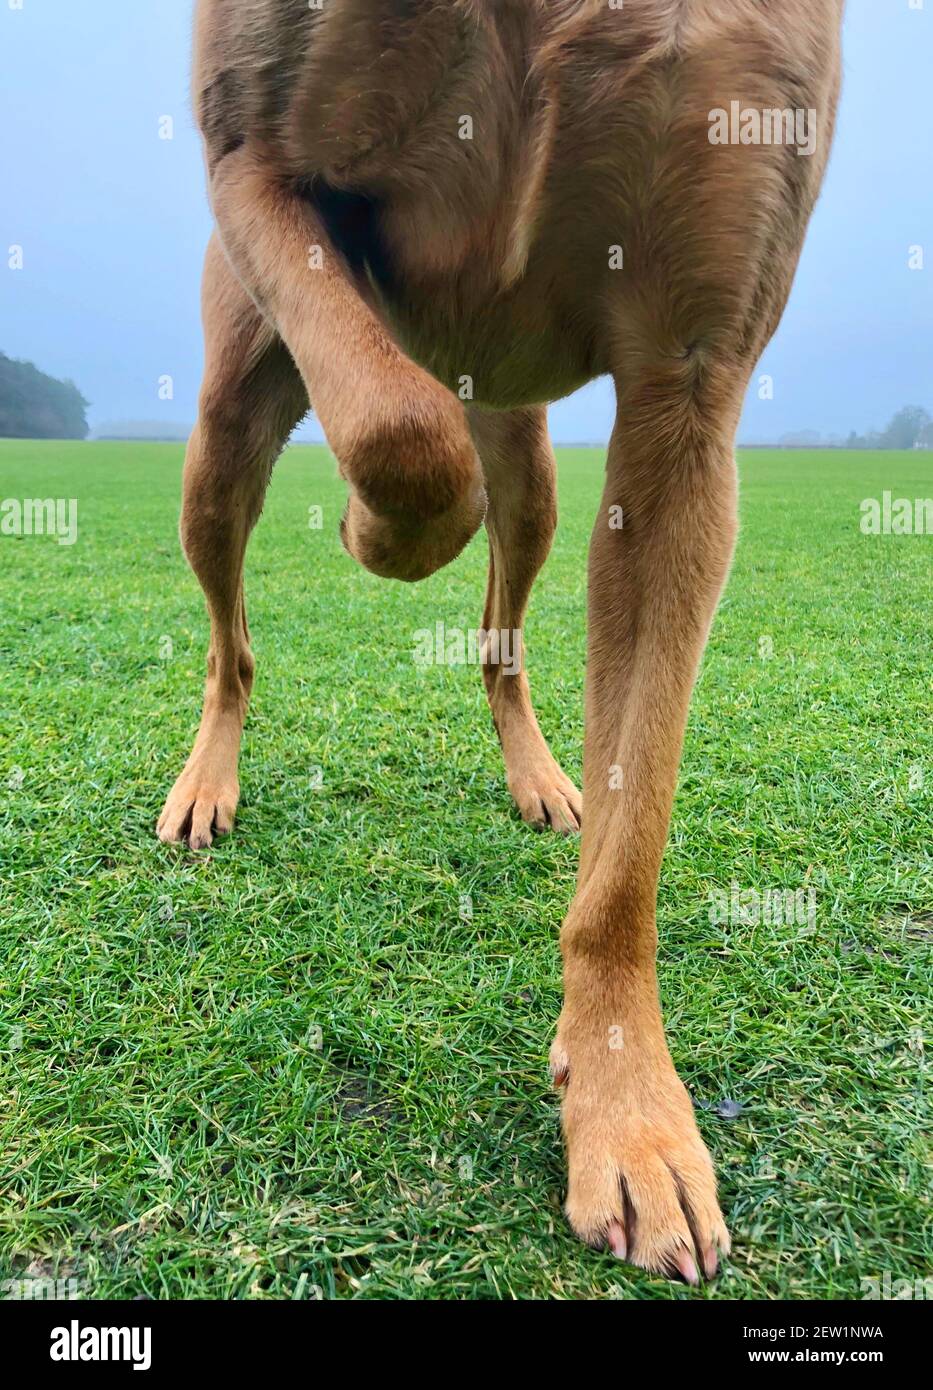 A pet dog standing on three legs and limping with an injured leg or paw or broken bones Stock Photo